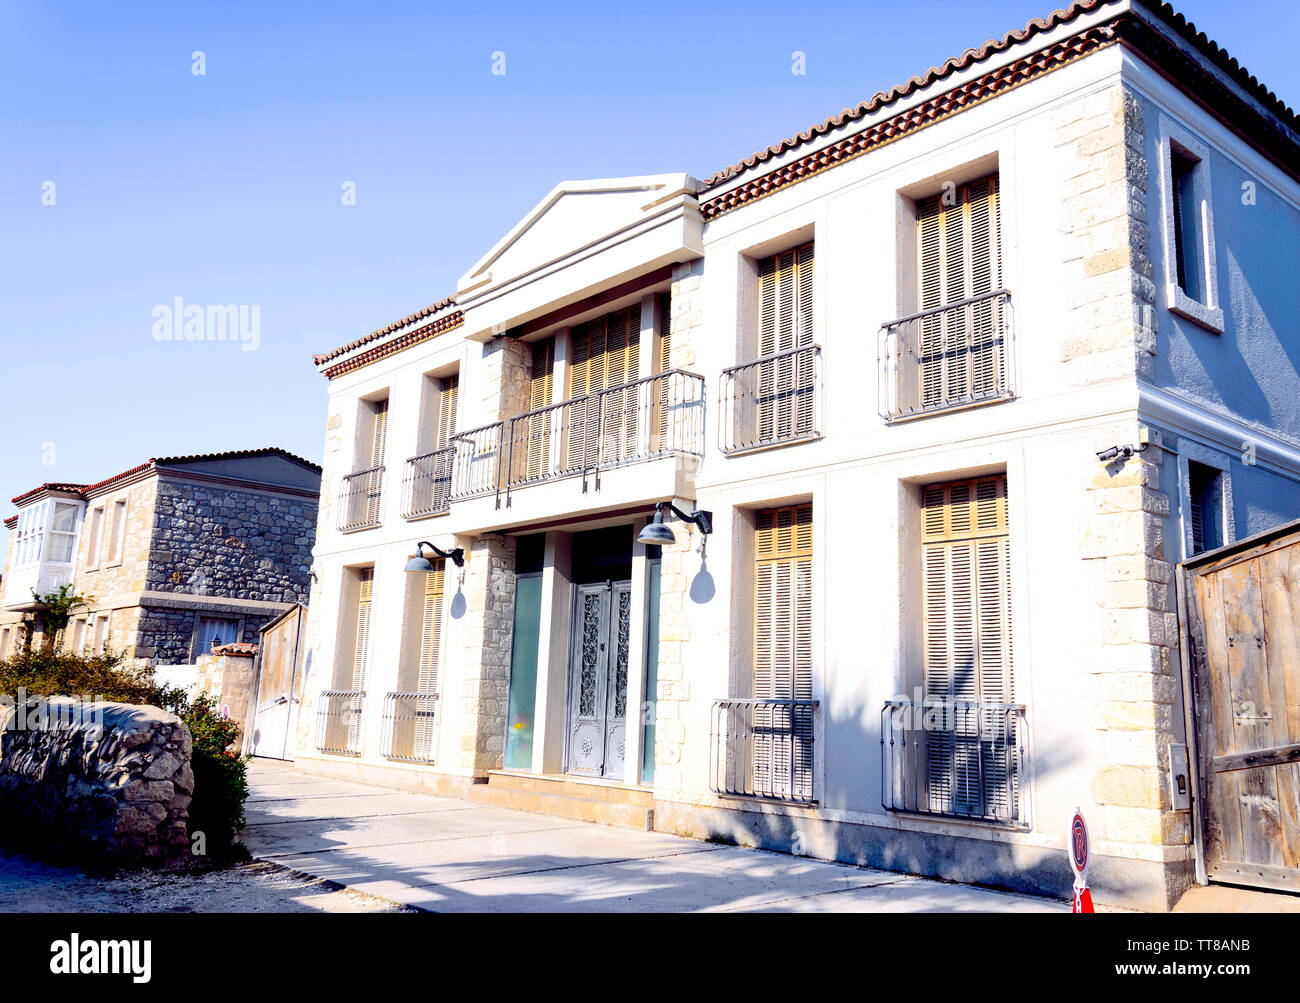 Old Houses view in historical Alacati Town. Alacati is popular tourist destination in Turkey. Stock Photo